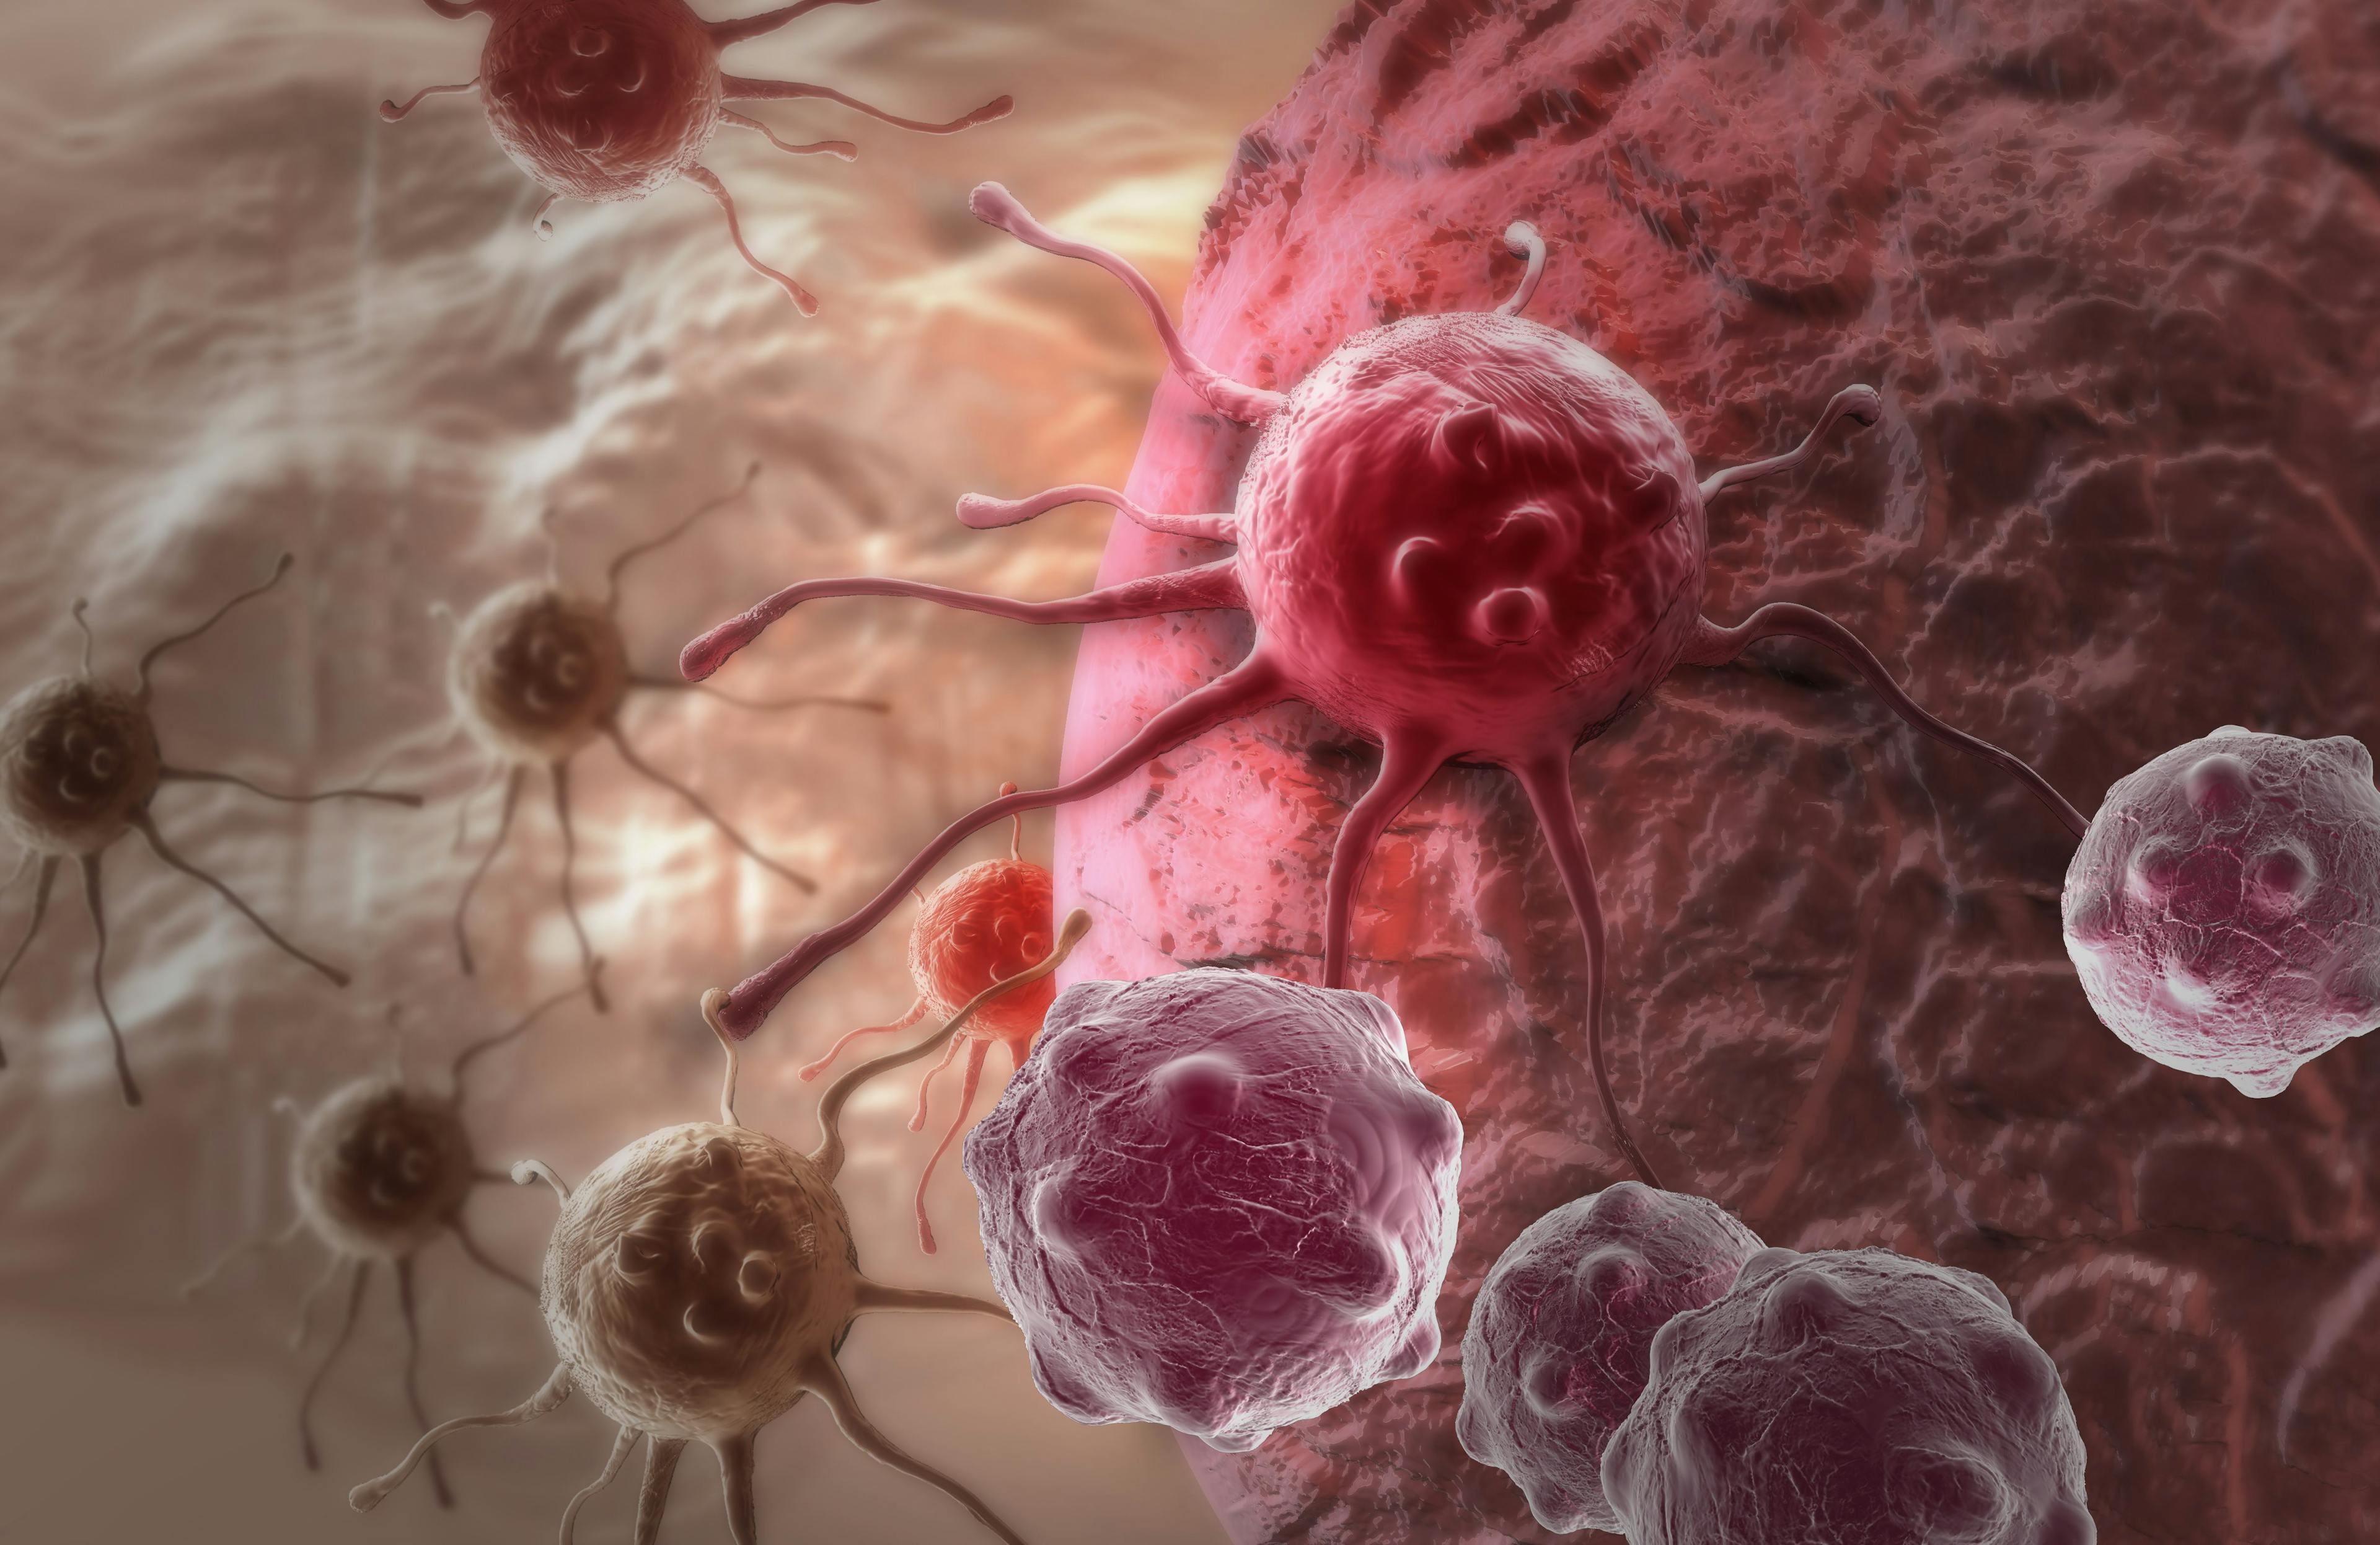 Bempegaldesleukin Plus Nivolumab Appears Safe and Effective in First-Line Metastatic Melanoma